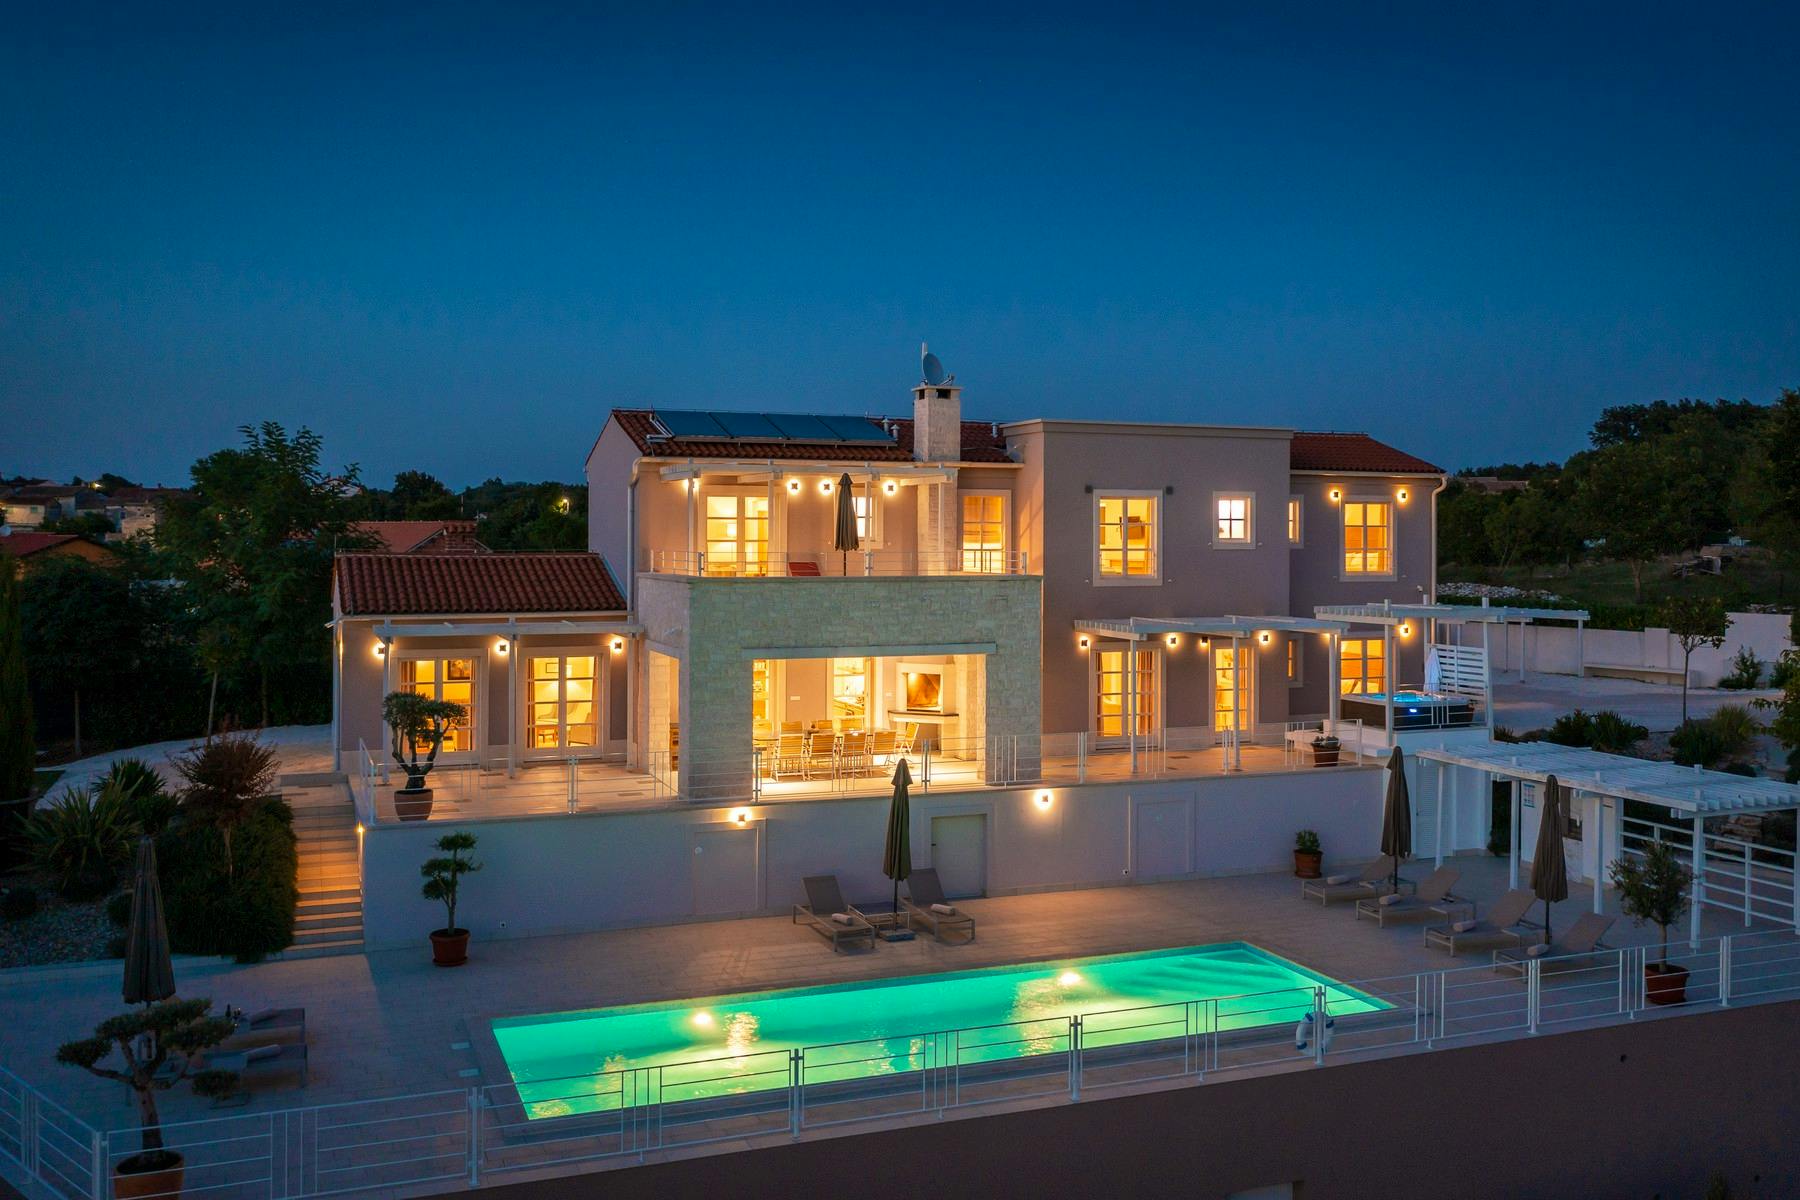 Villas in the night ambiance